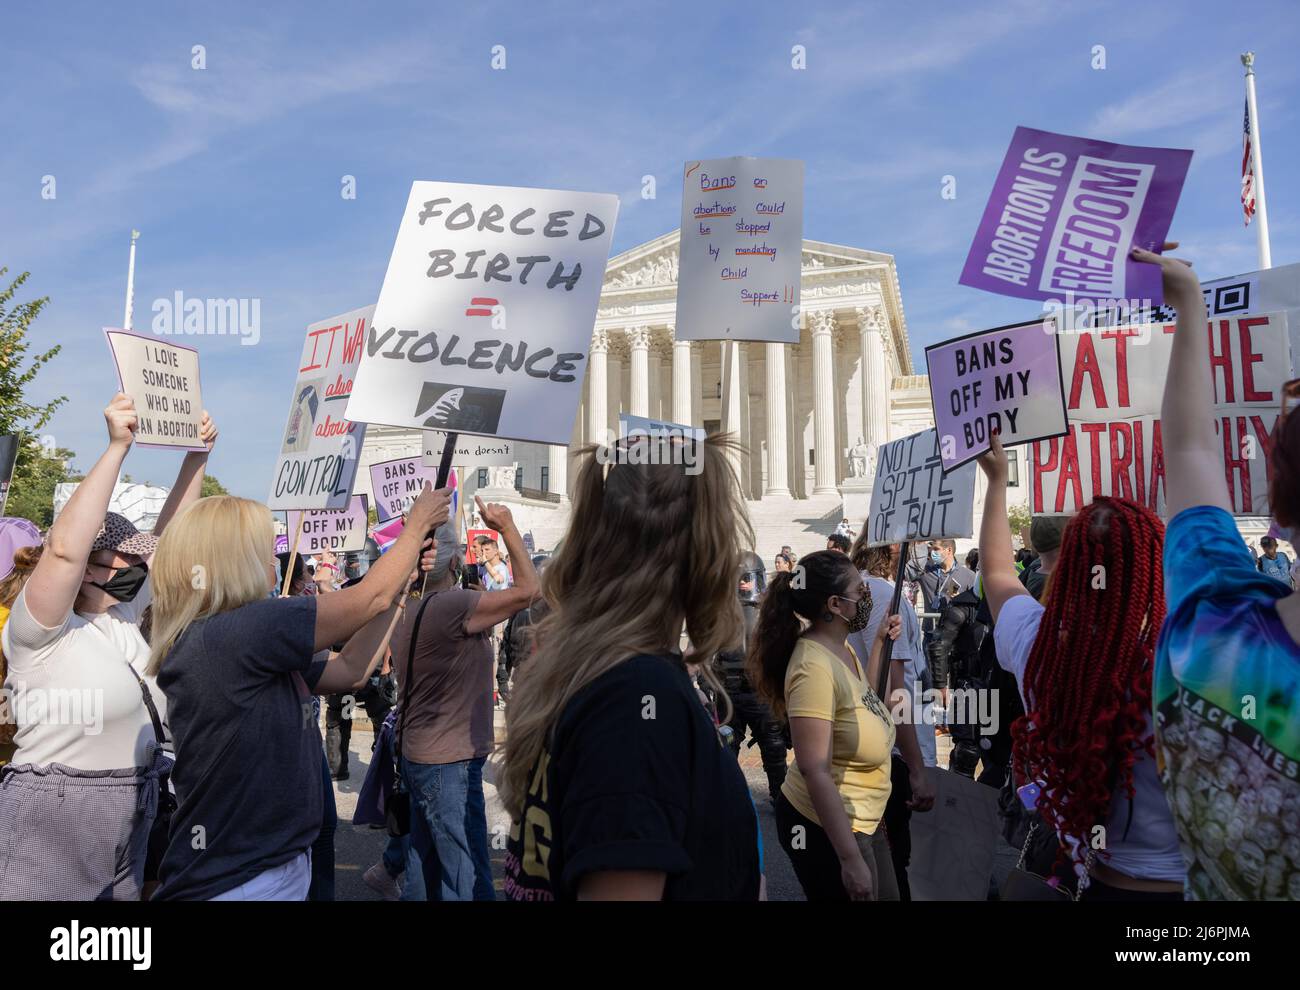 WASHINGTON, D.C. – October 2, 2021: Demonstrators participating in the 2021 Women’s March protest near the United States Supreme Court. Stock Photo